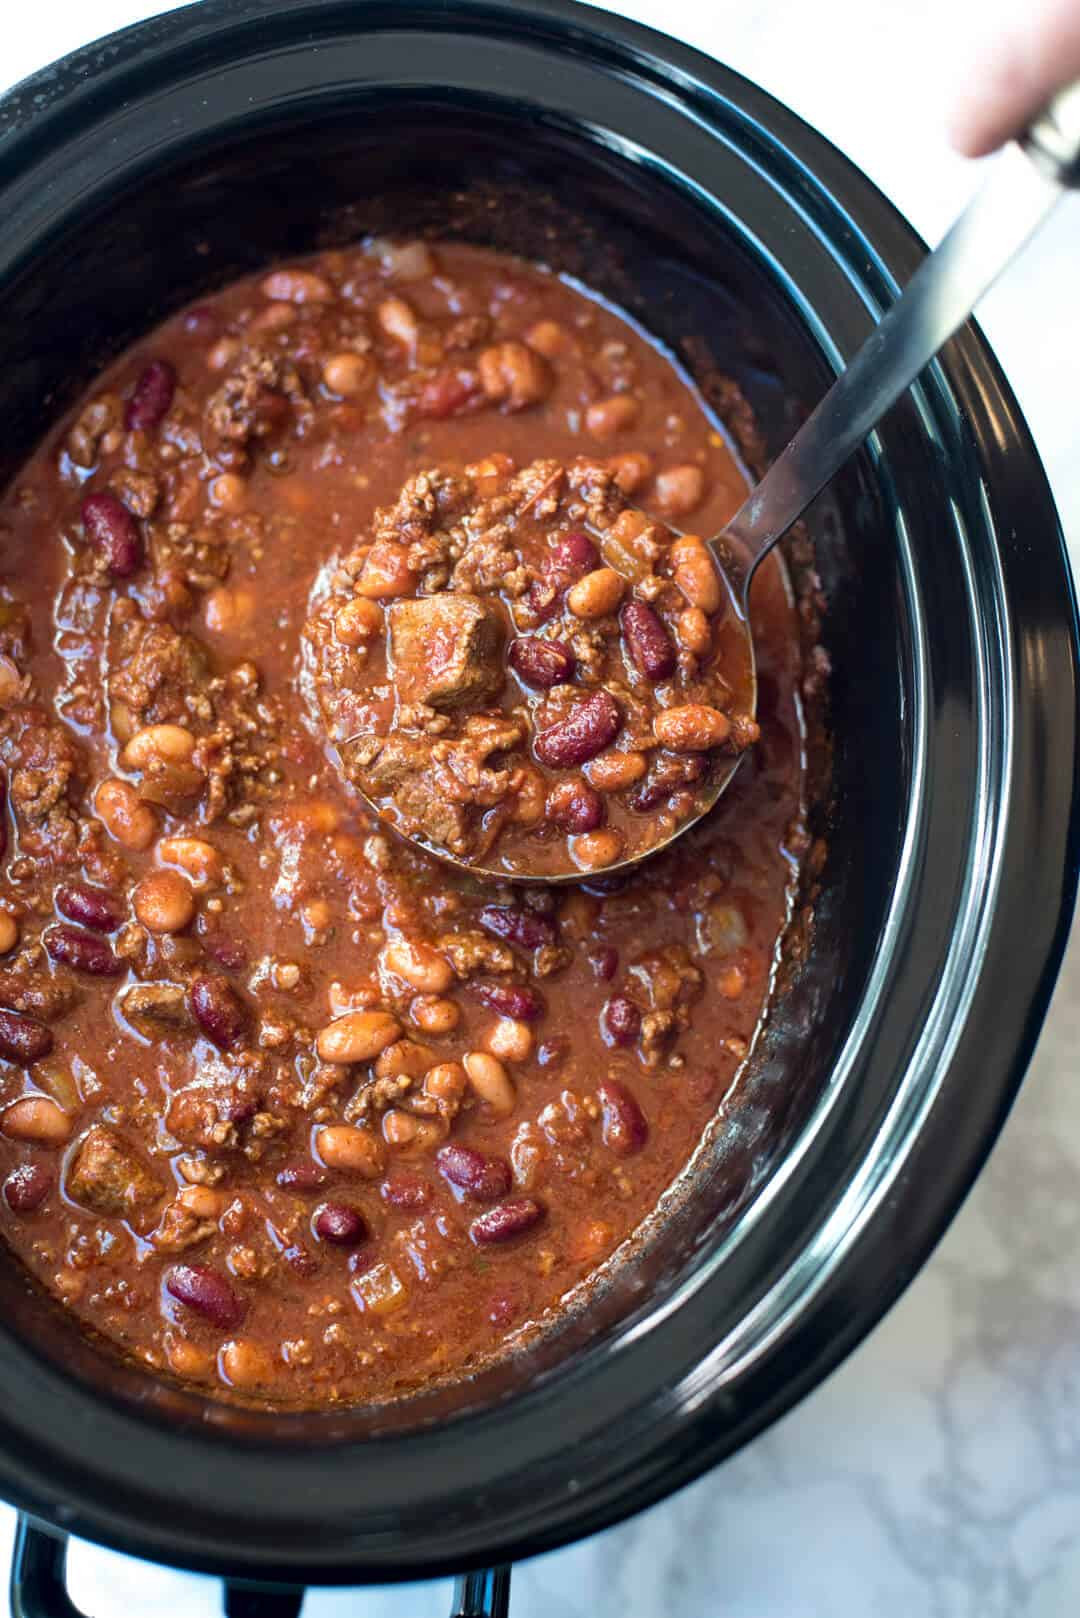 Pinto Beans And Ground Beef Recipe Slow Cooker
 Slow Cooker Double Beef and Bean Chili